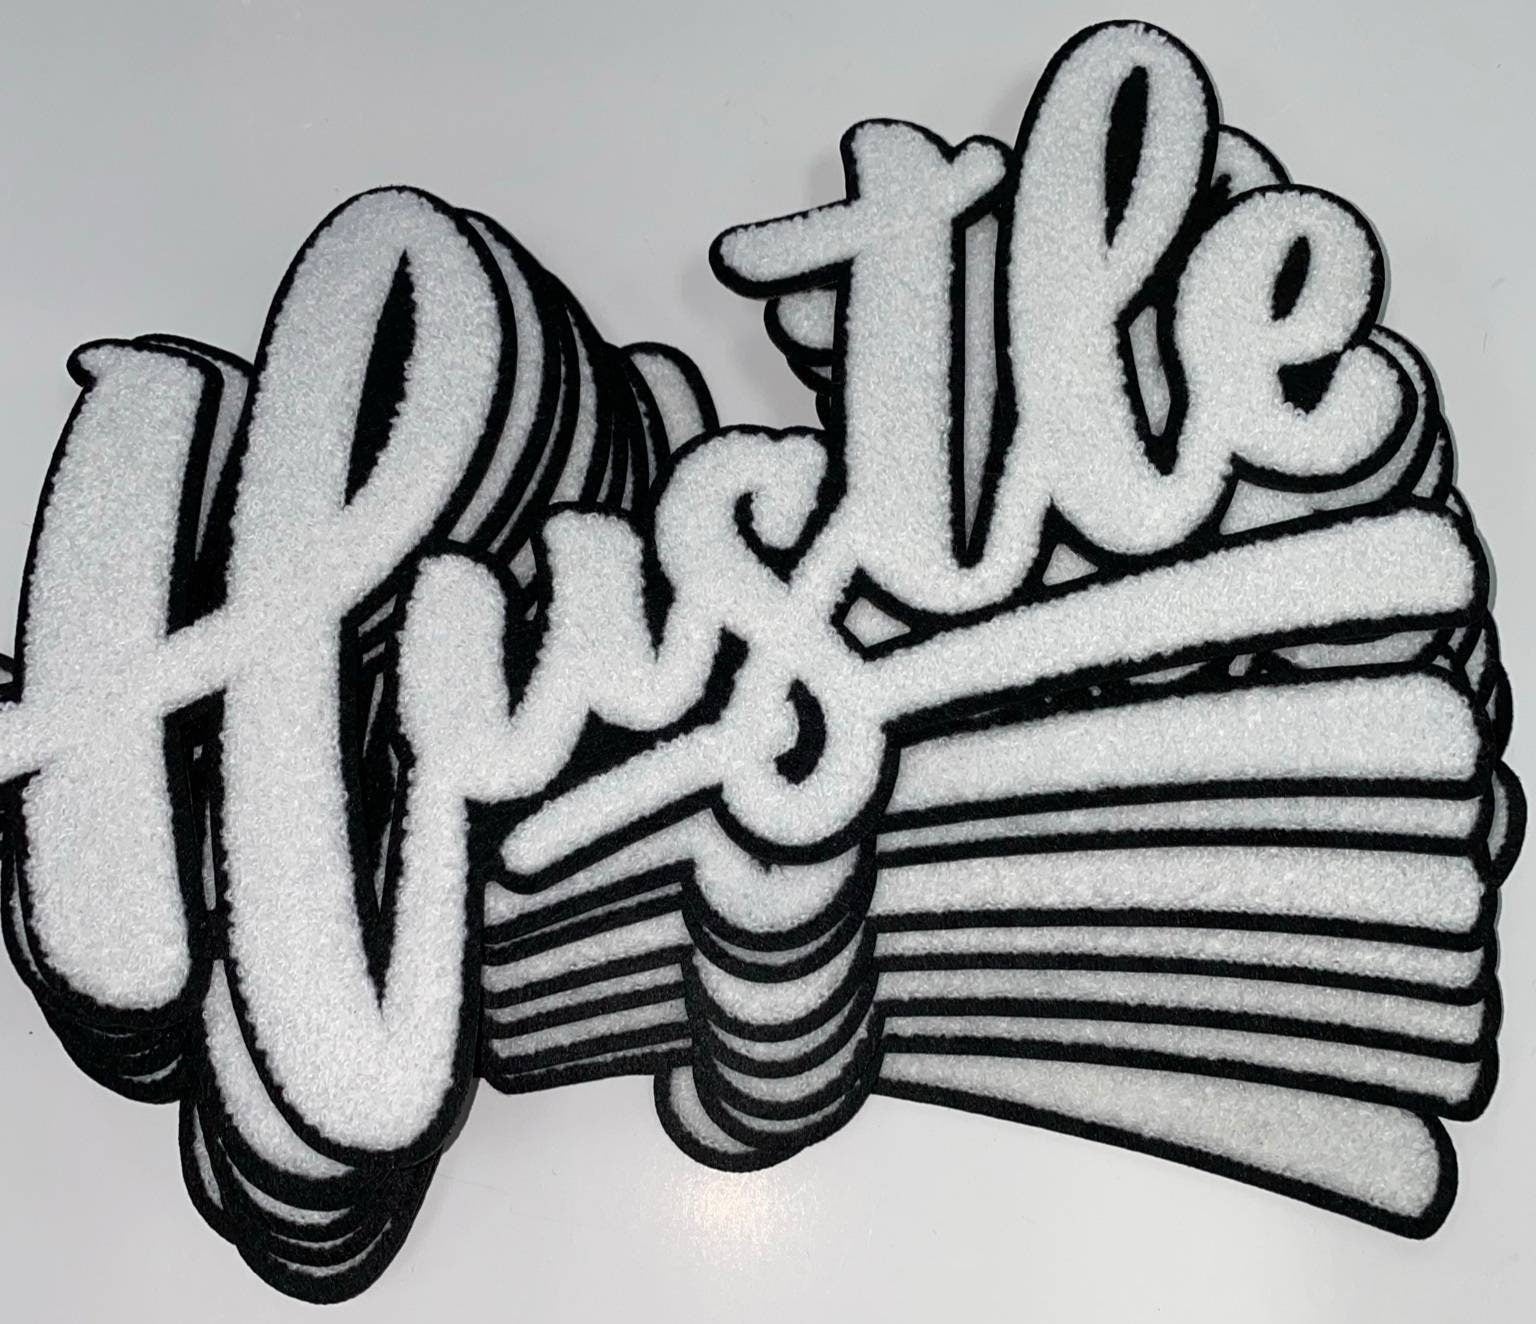 NEW, Large,Pure White w/ Black Felt "Hustle" Chenille Patch iron-on Size 10"x8", Exclusive Varsity Patch for Denim Jacket, Shirts, & Hoodies